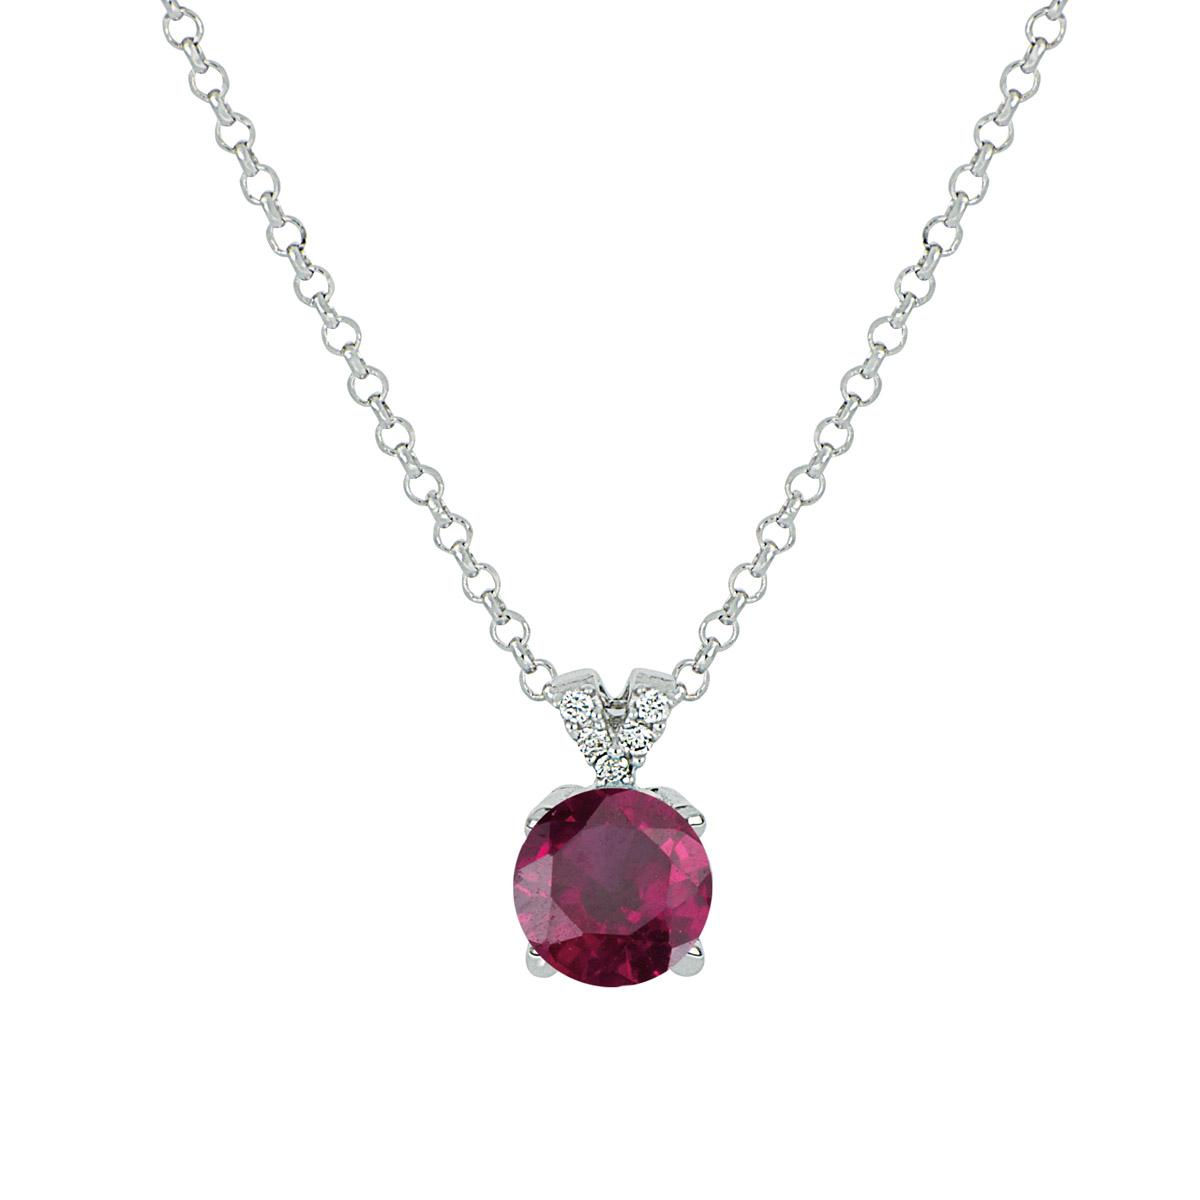 18kt white gold necklace with diamonds and central precious stone - CD617